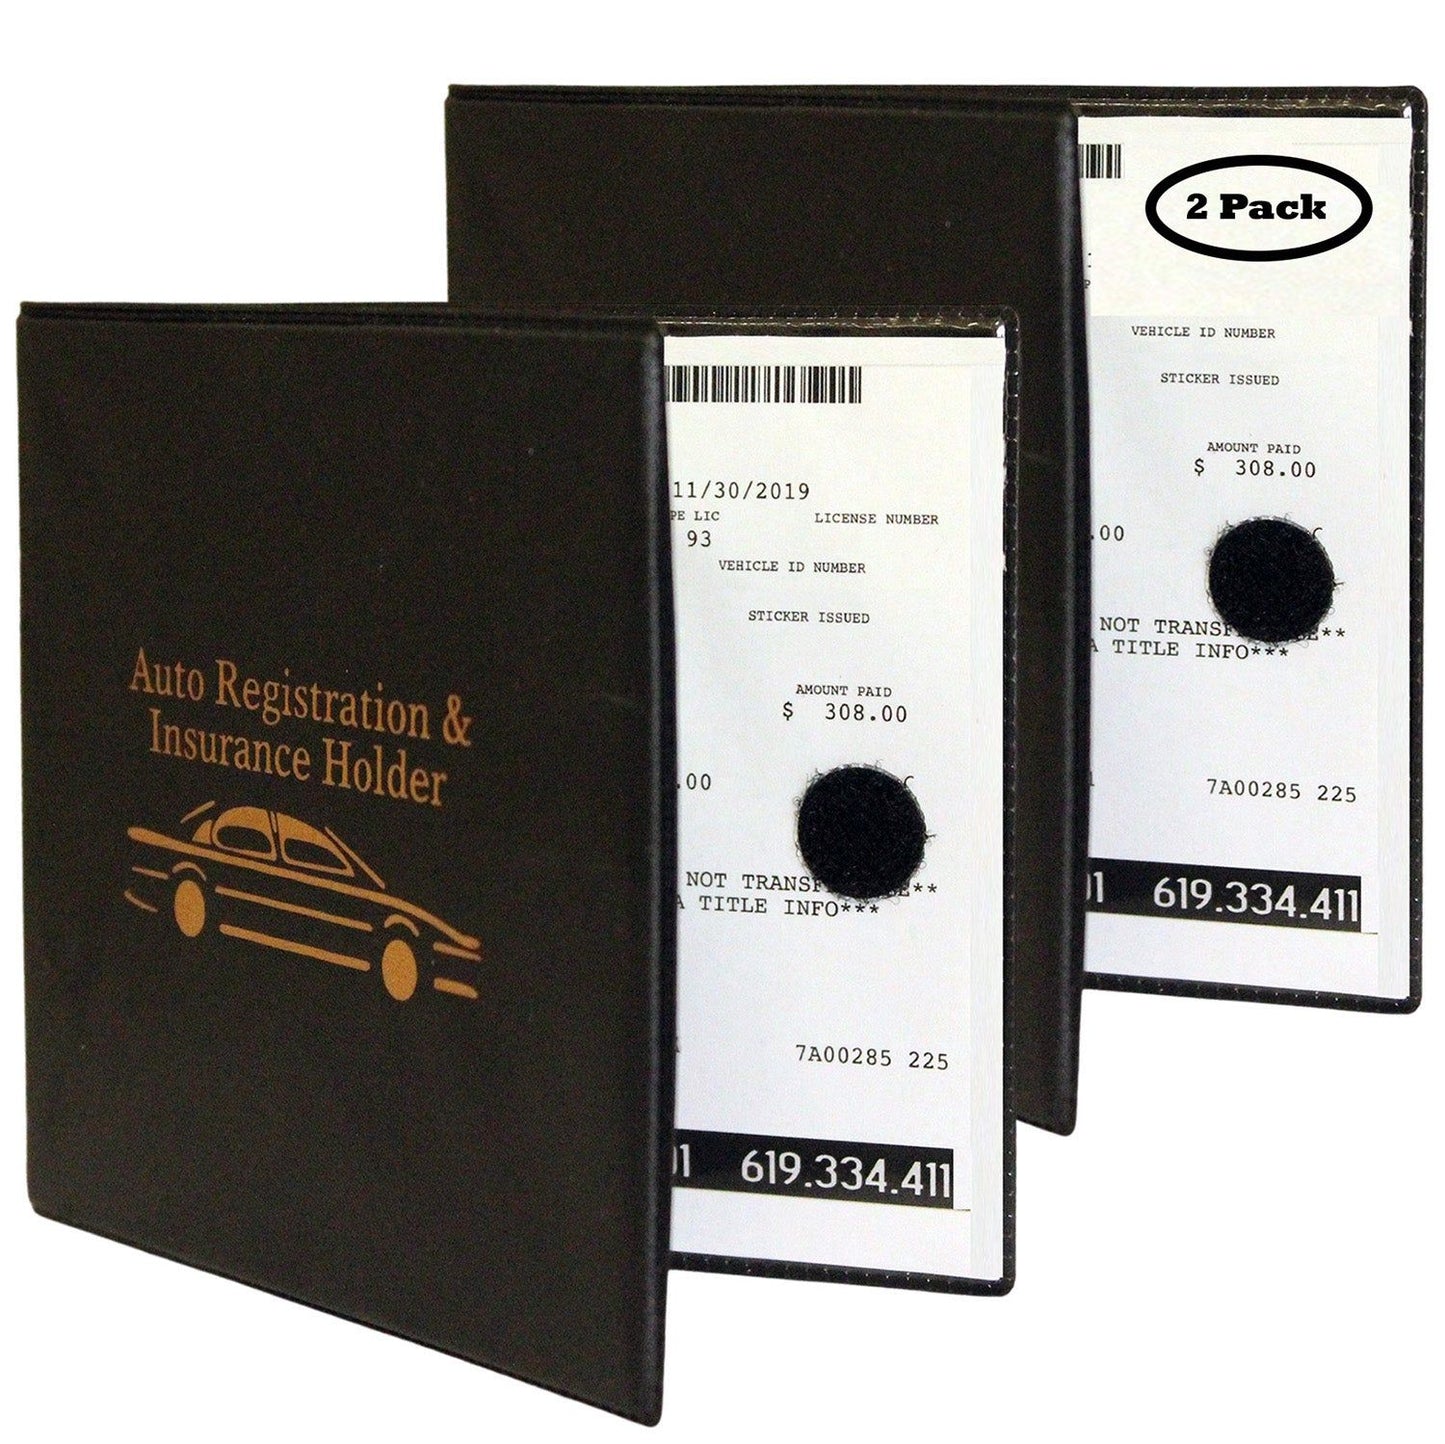 W4W Auto Registration Insurance & ID Card Holder (Value Pack) - W4W Products 